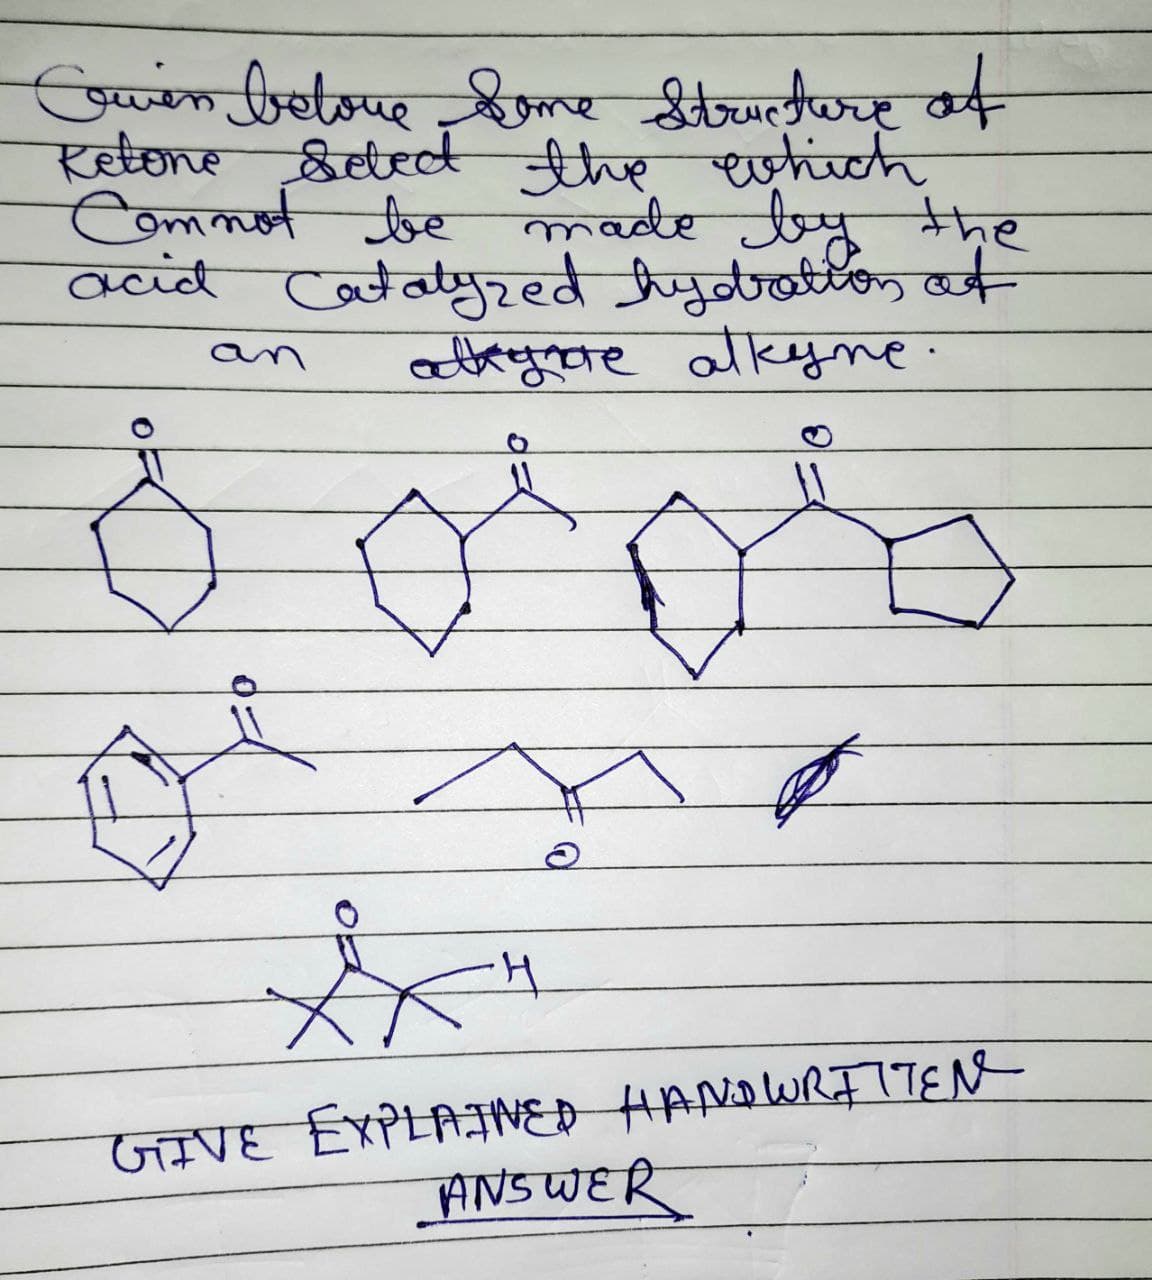 Ewen betove Some Structure of
Retone Select the which
Comnot be made by the
acid Catalyzed hydration of
adkyne alkyne.
ට
웃
GIVE EXPLAINED HANDWRITTEN
ANSWER